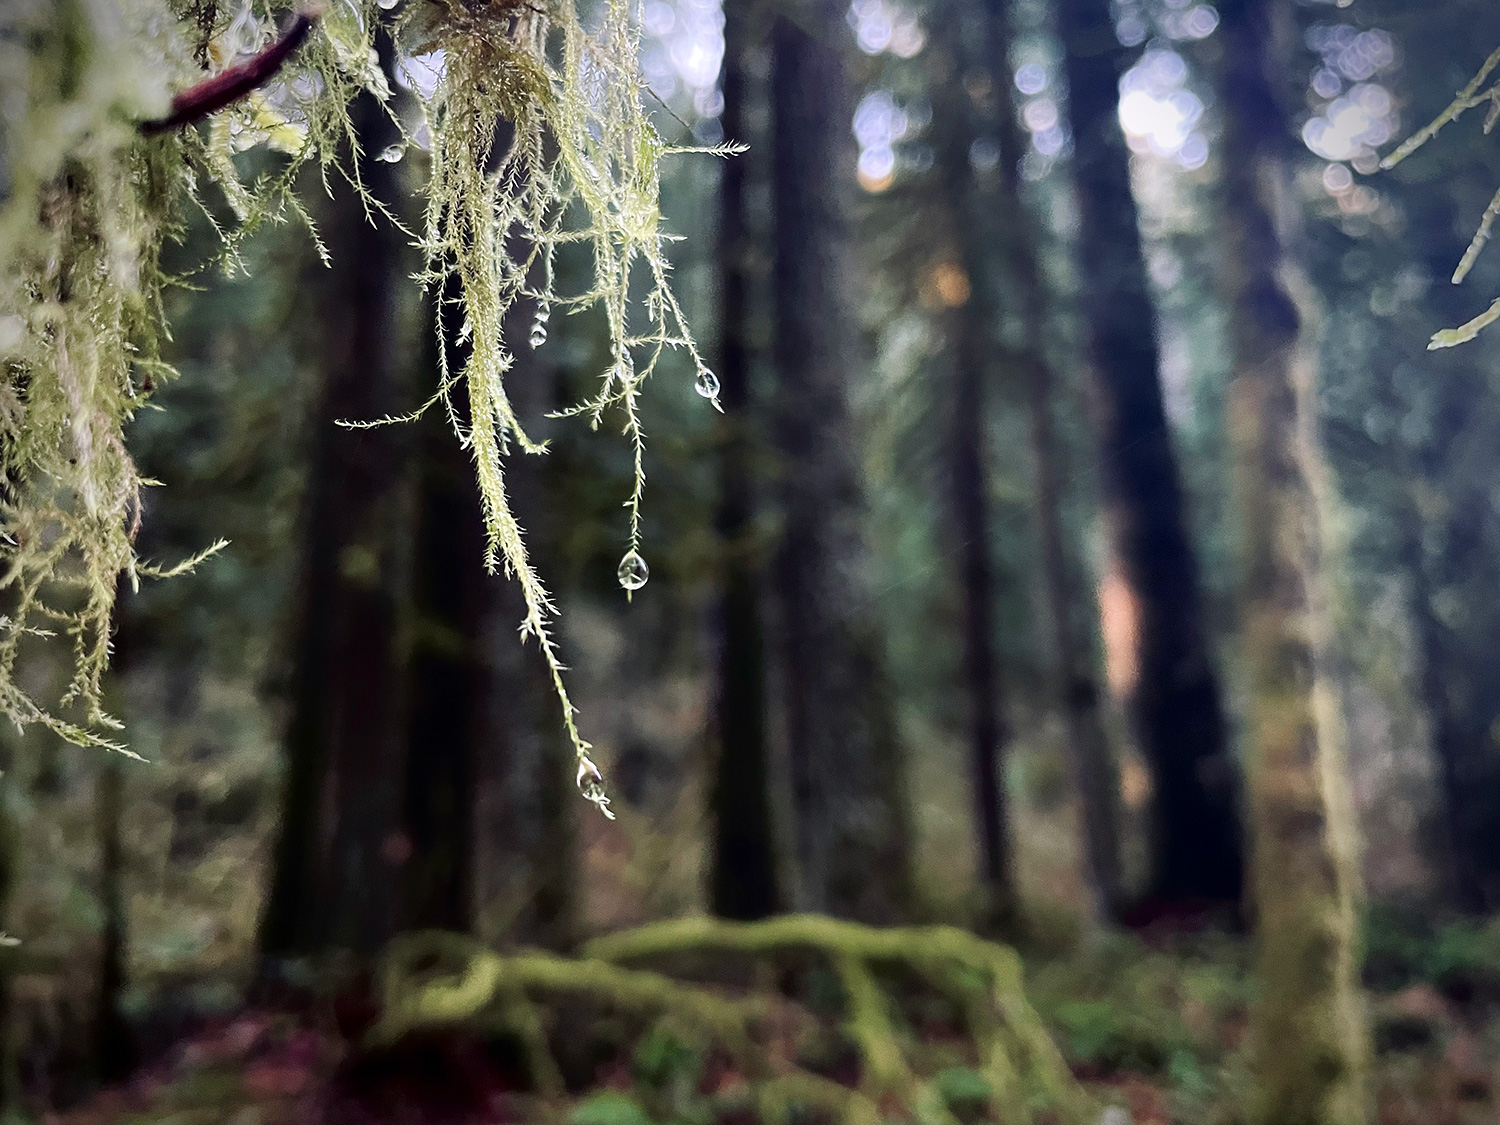 Water droplets and usnea hanging from a branch along the forest path